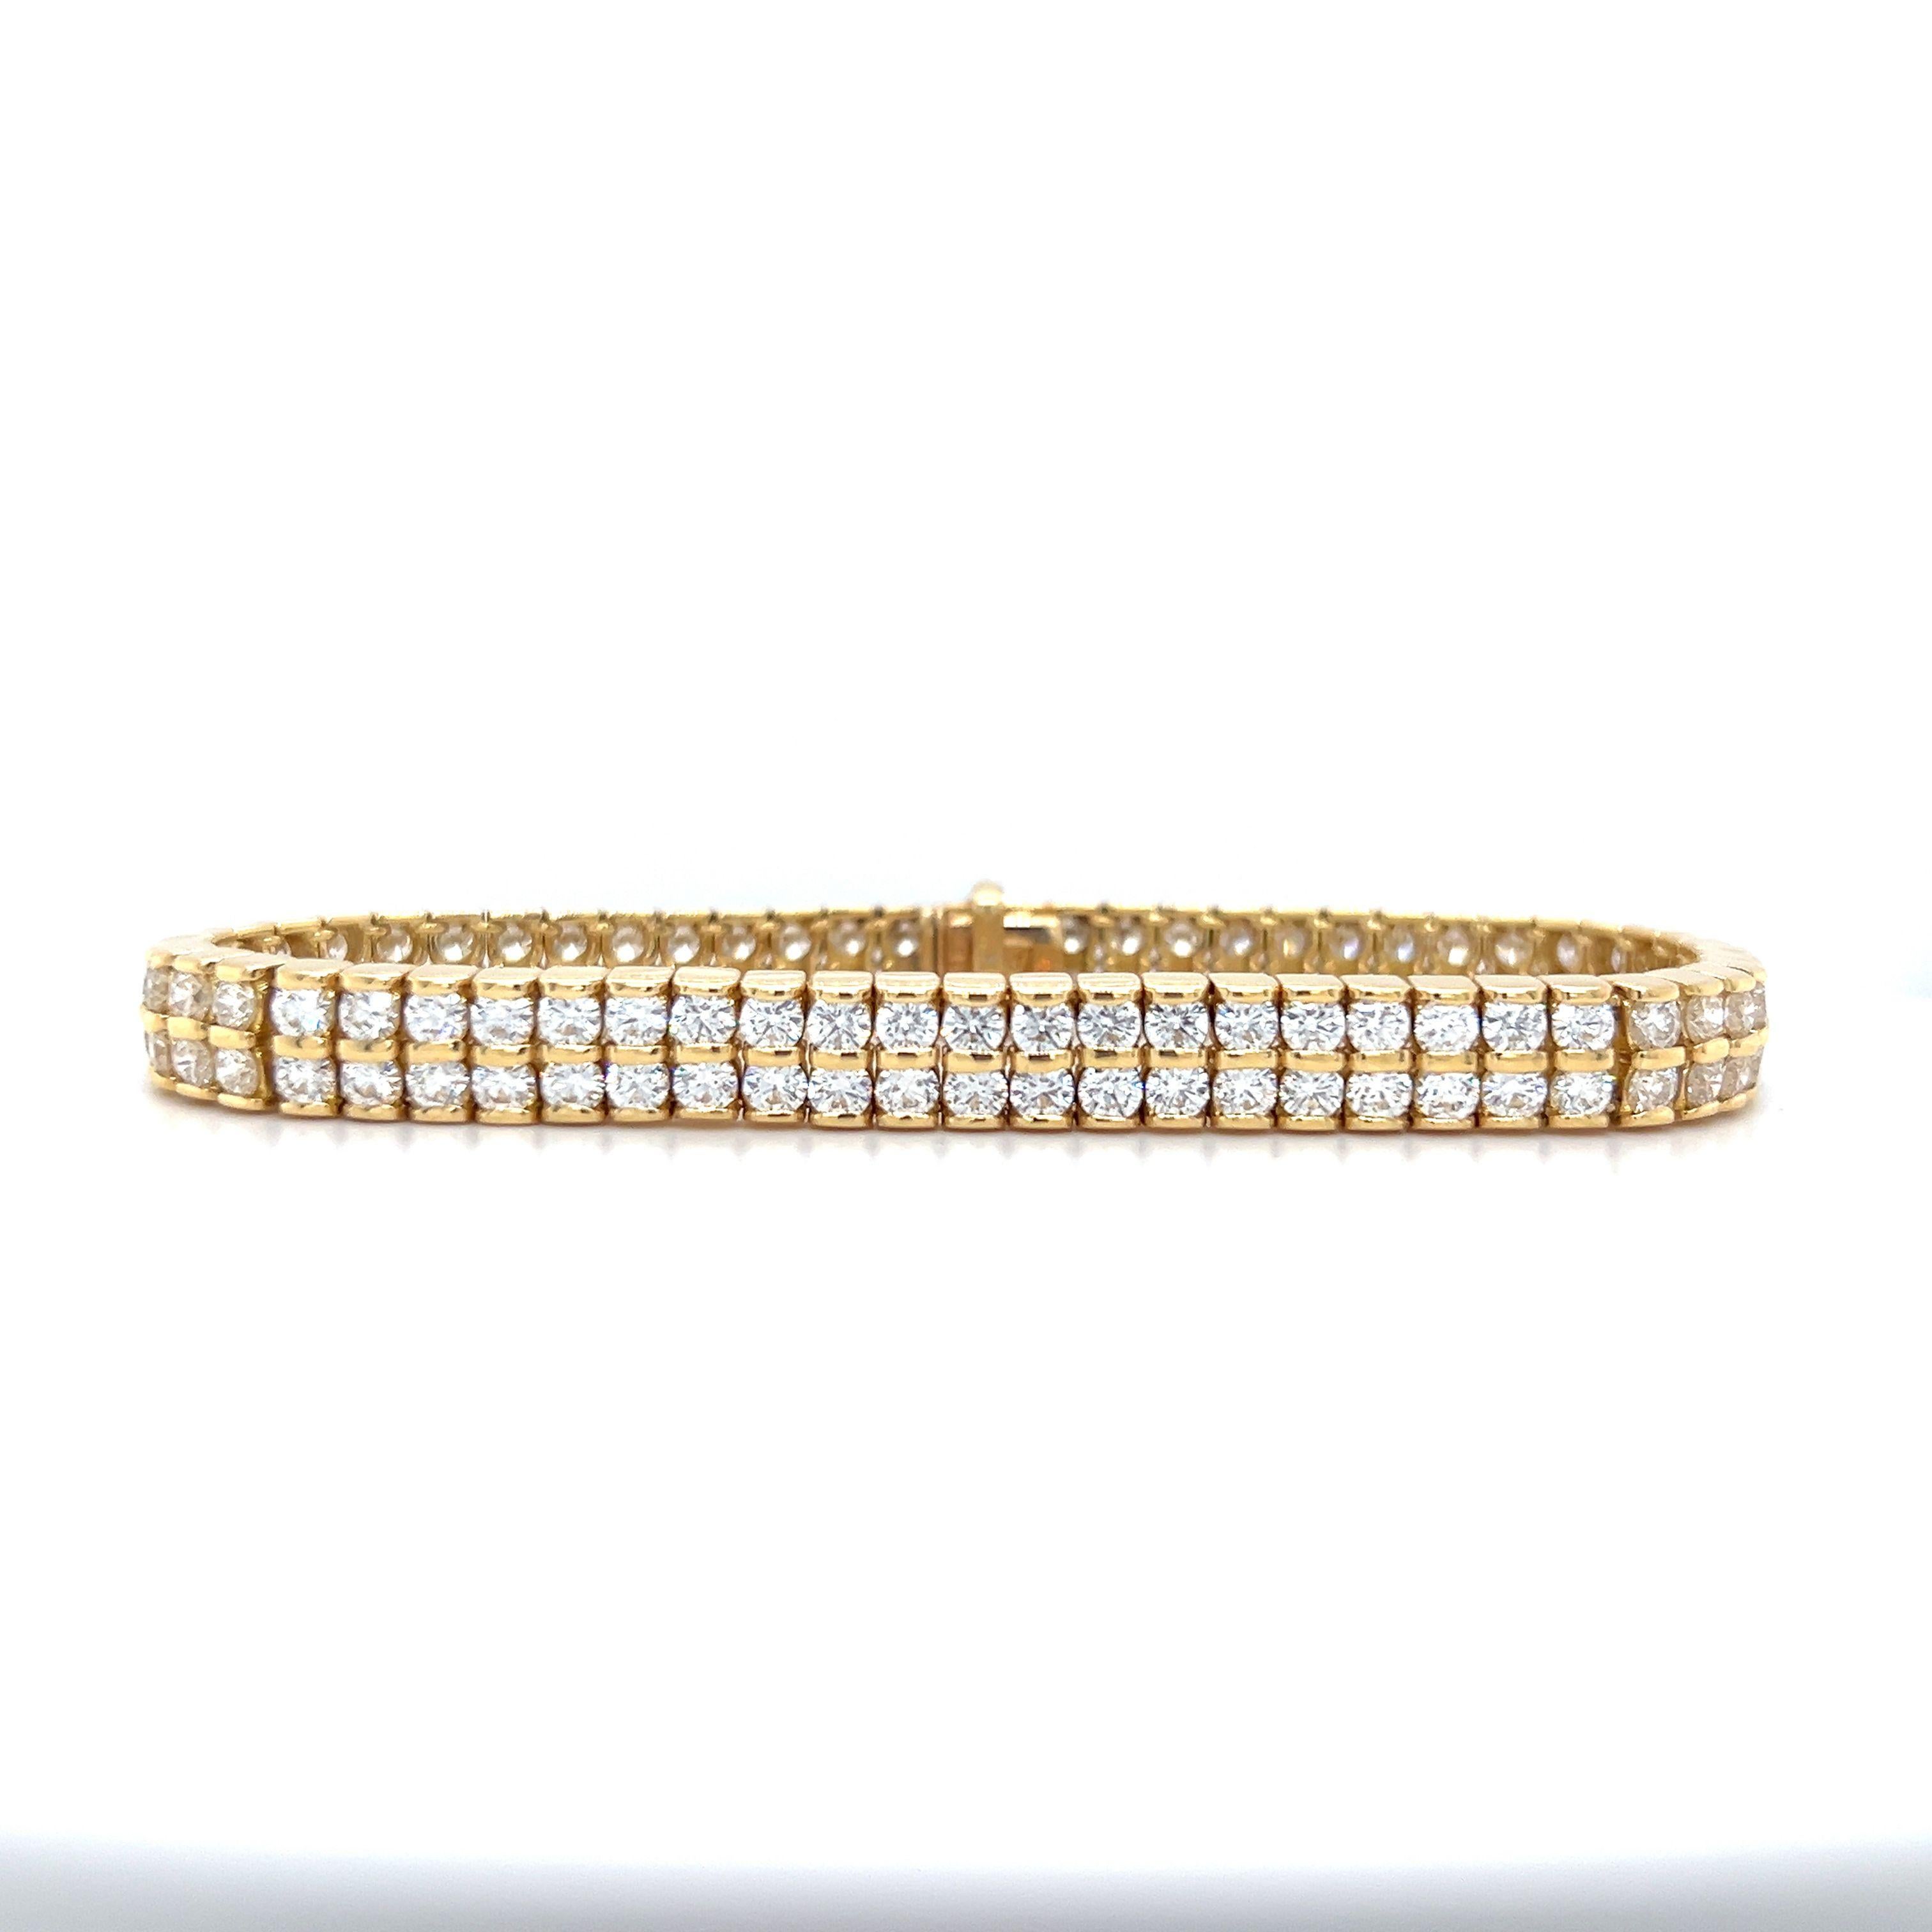 This stunning bracelet features 118 diamonds, arranged in a double row style. These high quality diamonds are 10.09 carats total weight, F-G color, and VS1 clarity. Crafted in 18k yellow gold, this bracelet is guaranteed to sparkle.